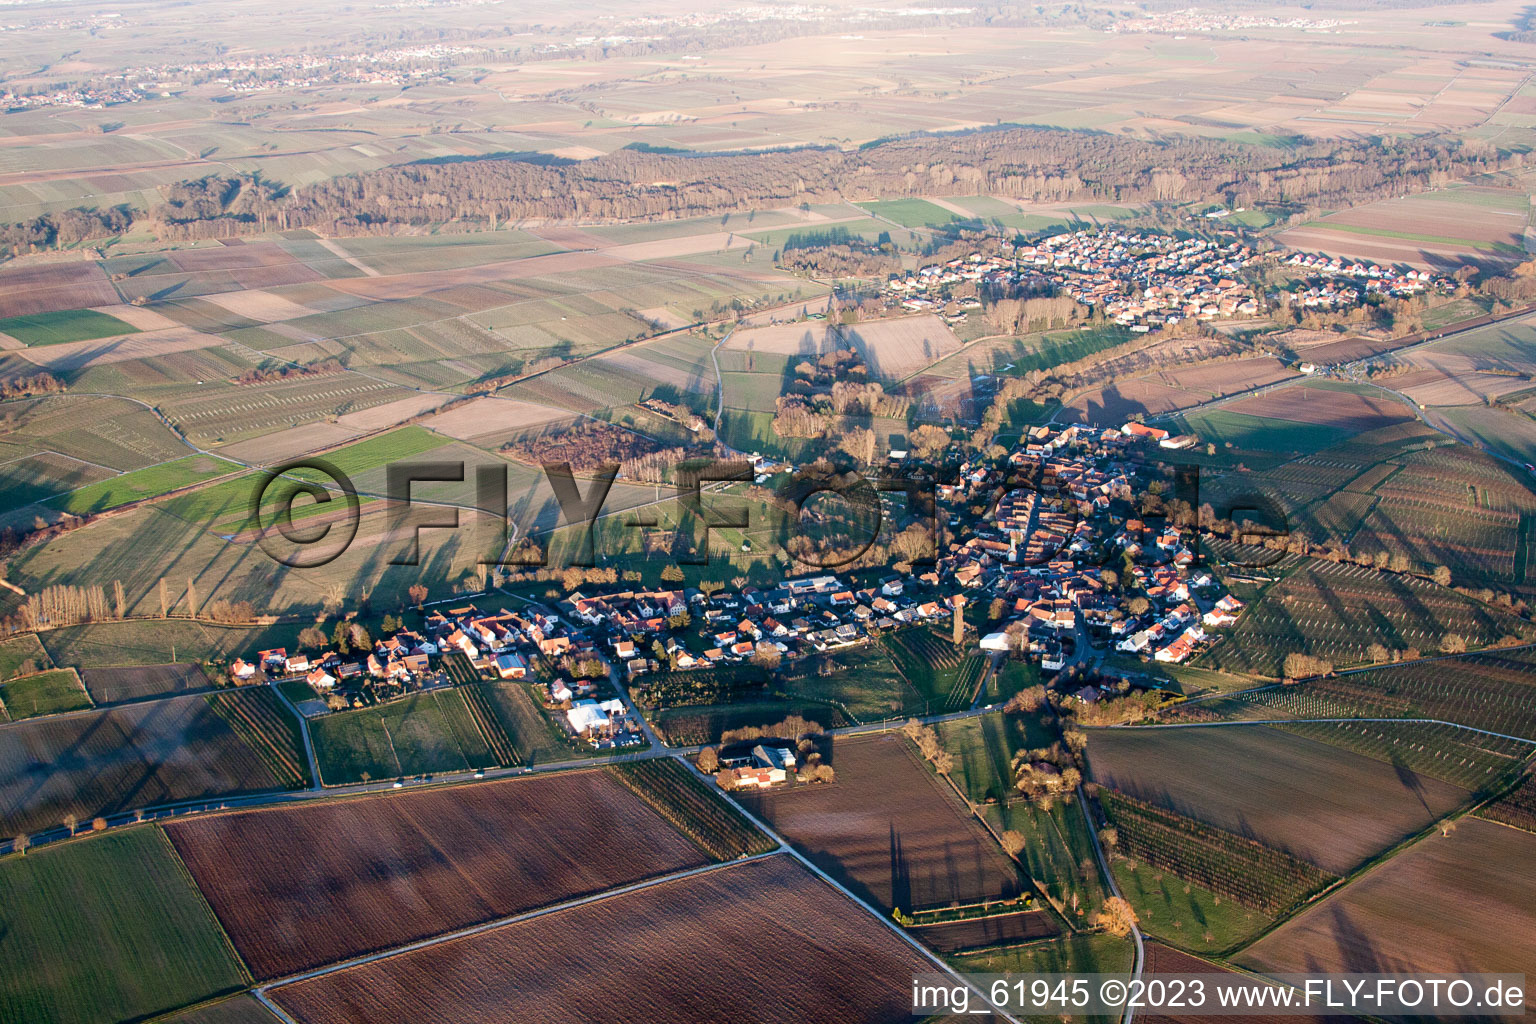 Oberhausen in the state Rhineland-Palatinate, Germany seen from a drone